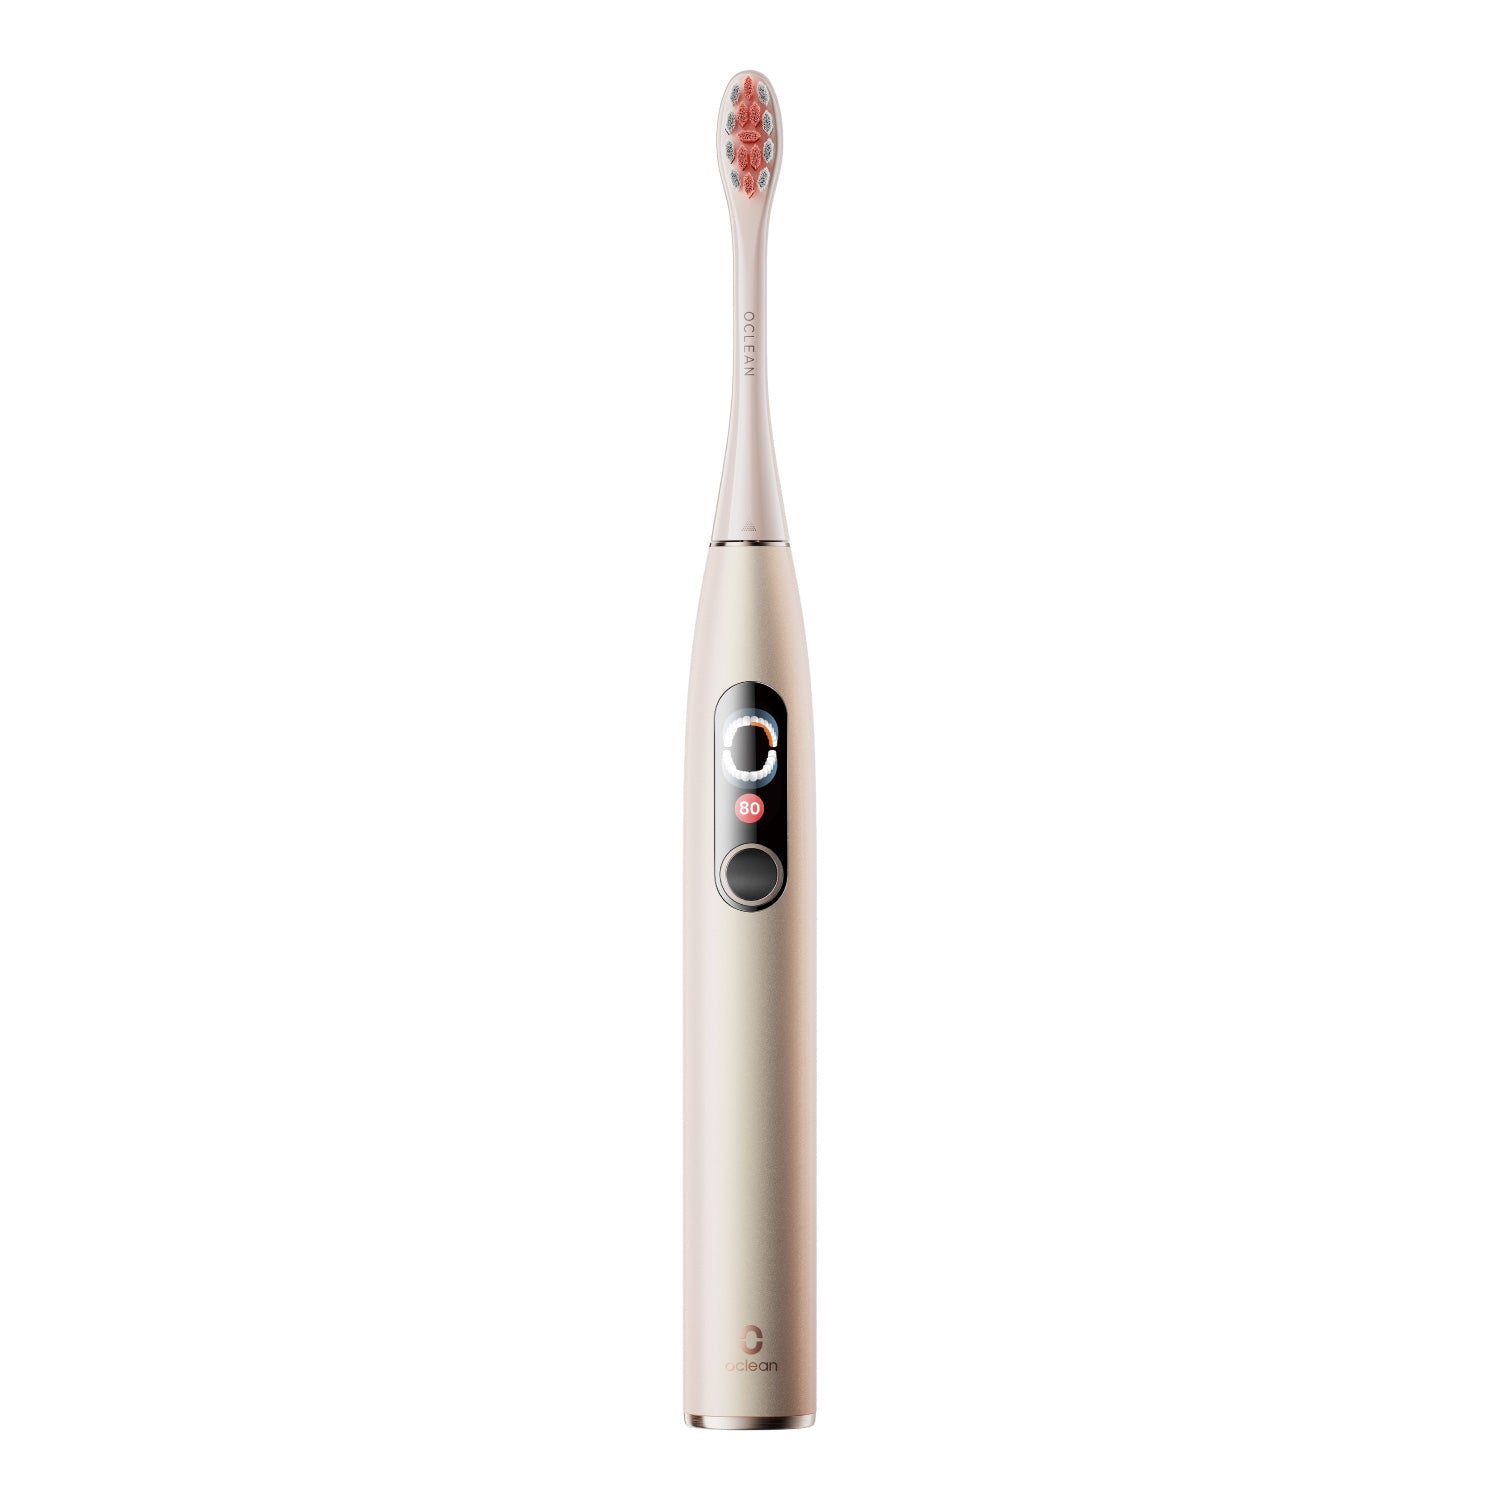 Oclean X Pro Digital Sonic Electric Toothbrush-Toothbrushes-Oclean Global Store